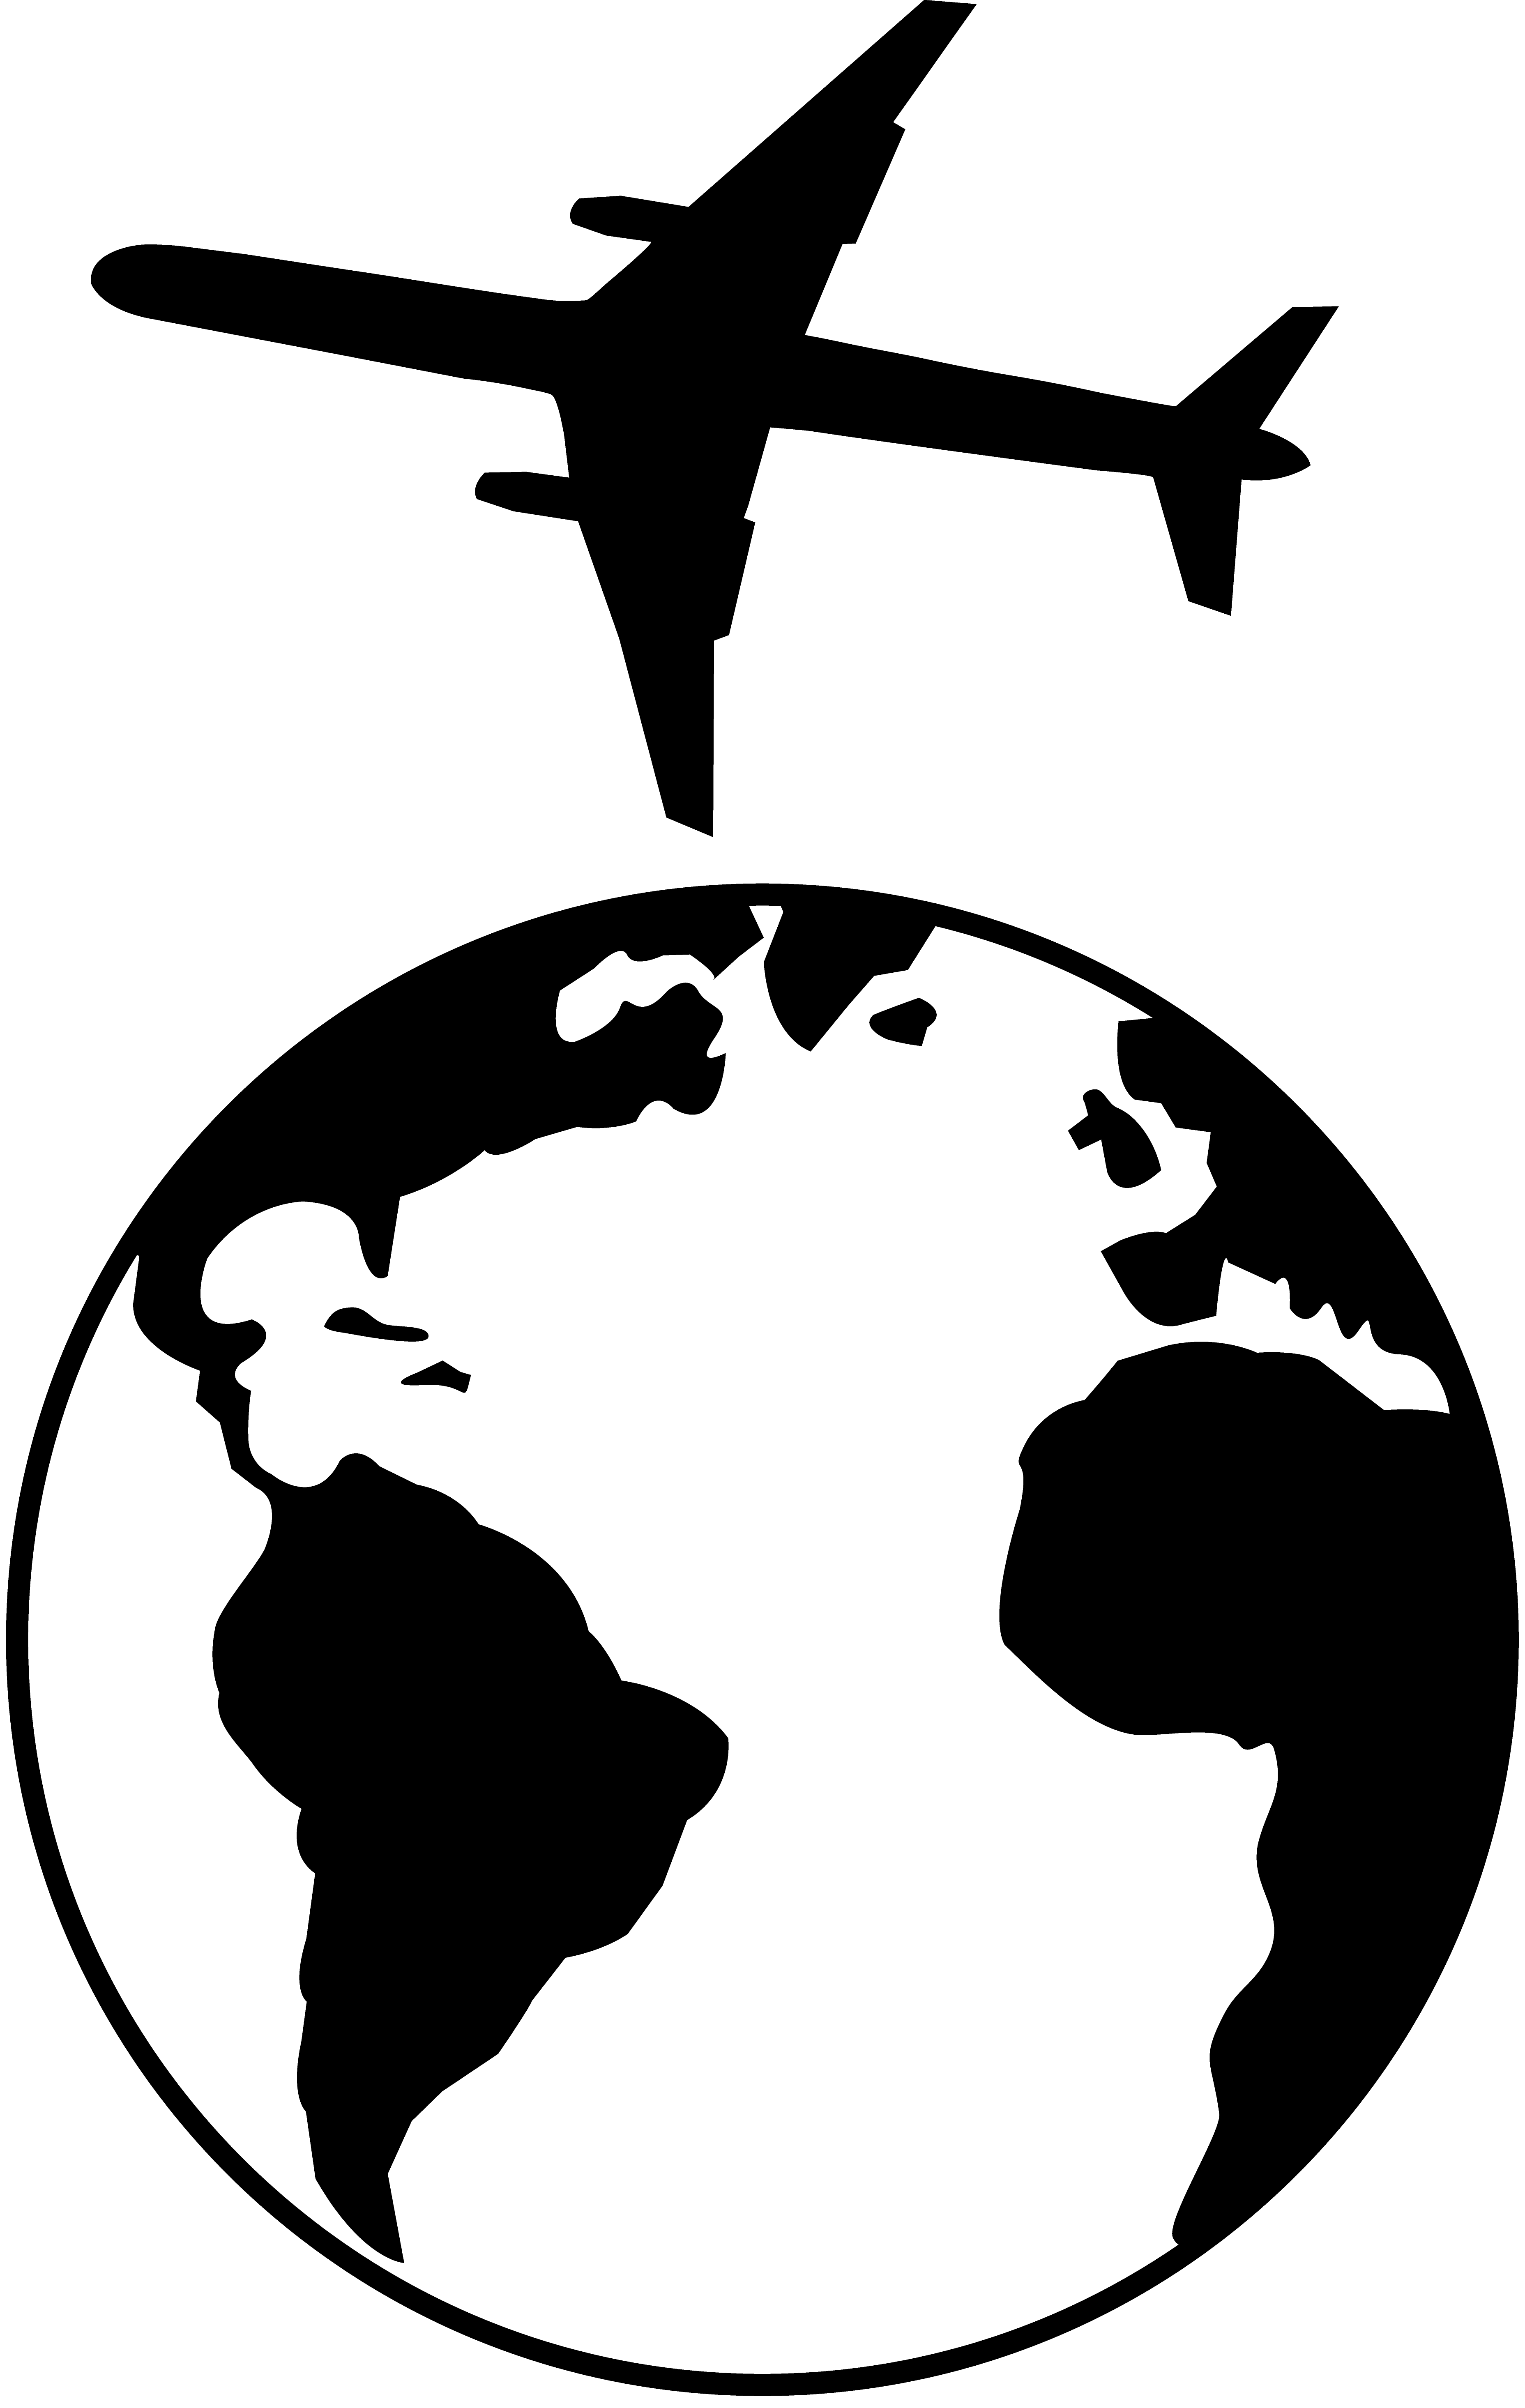 Earth Black And White | Free Download Clip Art | Free Clip Art ...